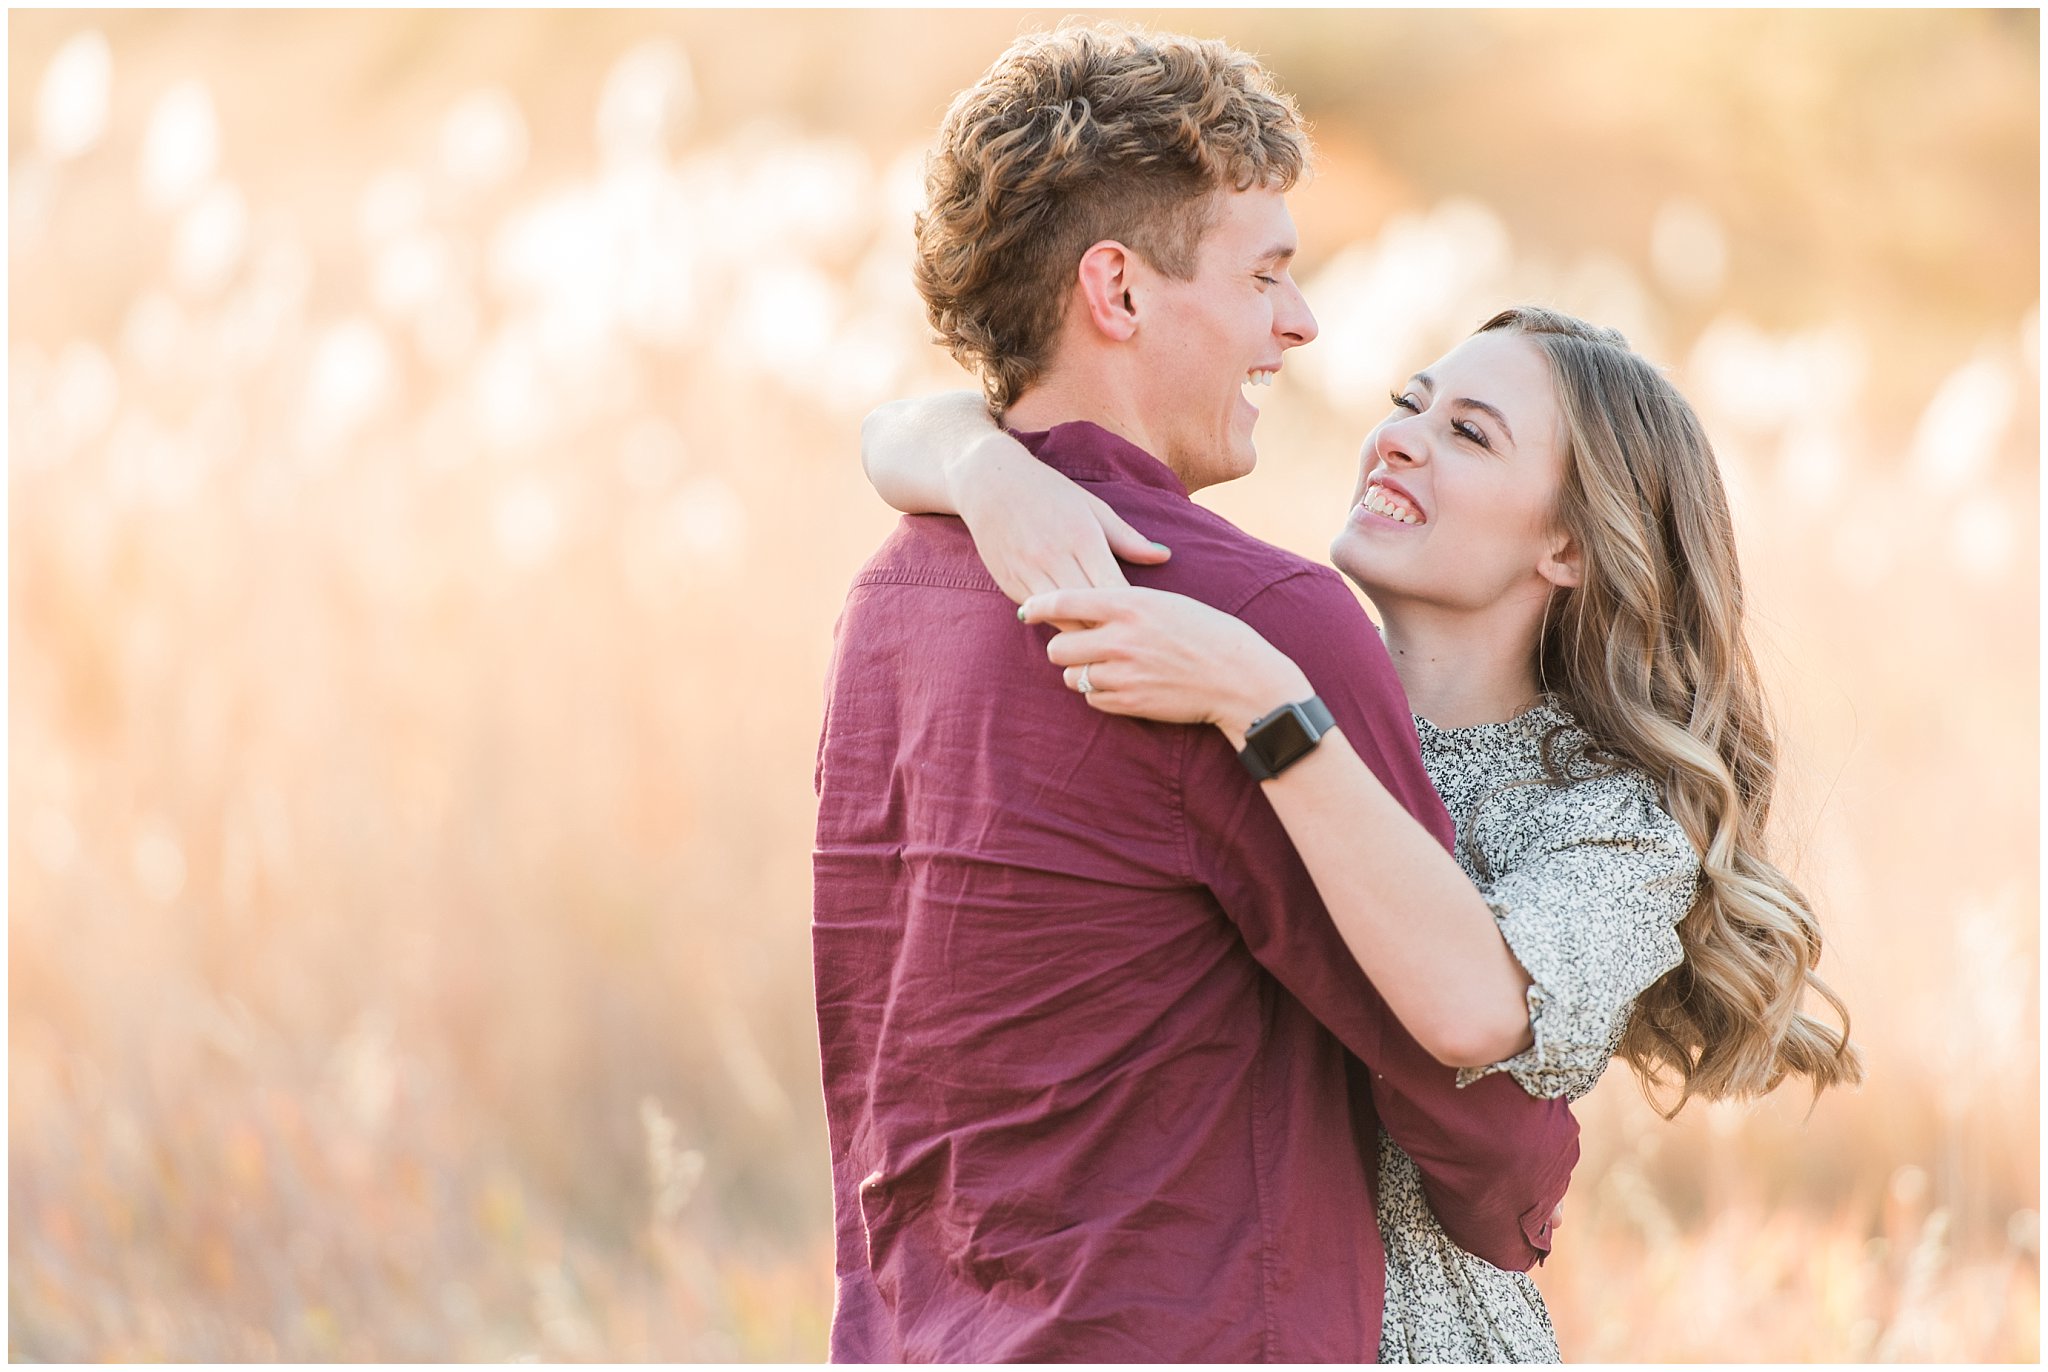 Candid photos of couple in formal outfit | Utah Fall Engagement Session in a Golden Field | Jessie and Dallin Photography